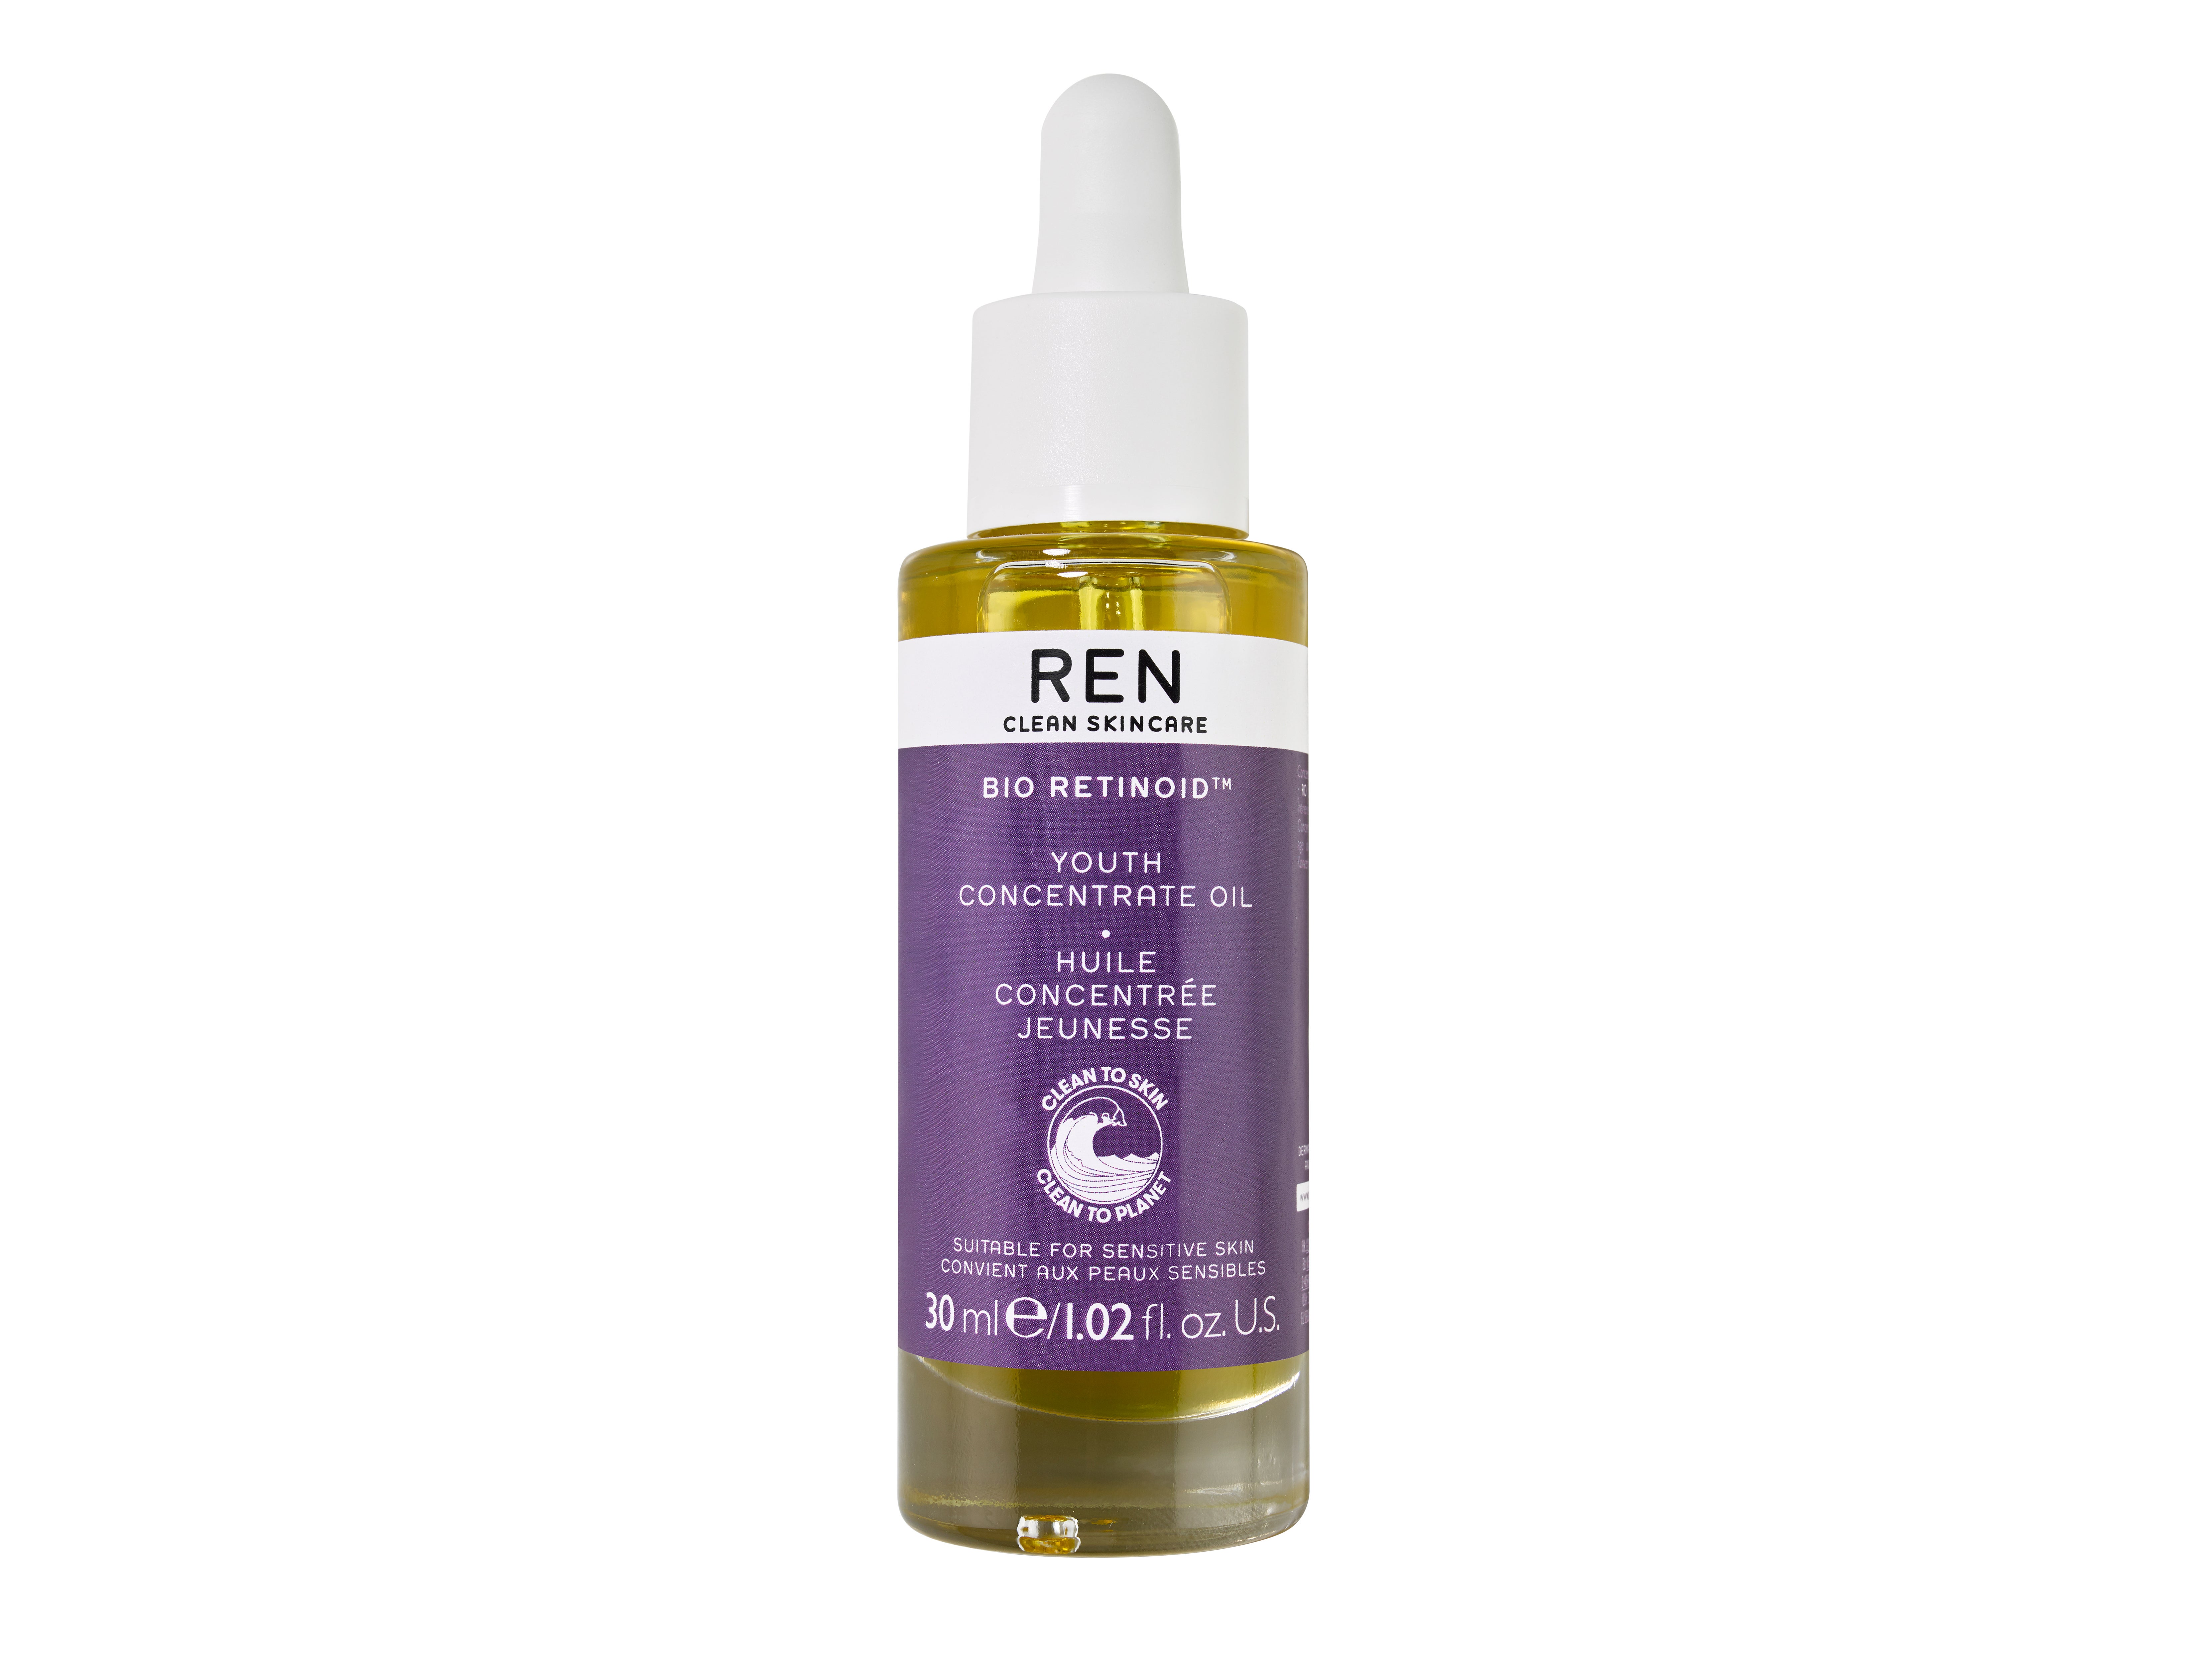 REN bio retinoid youth concentrate oil.jpg